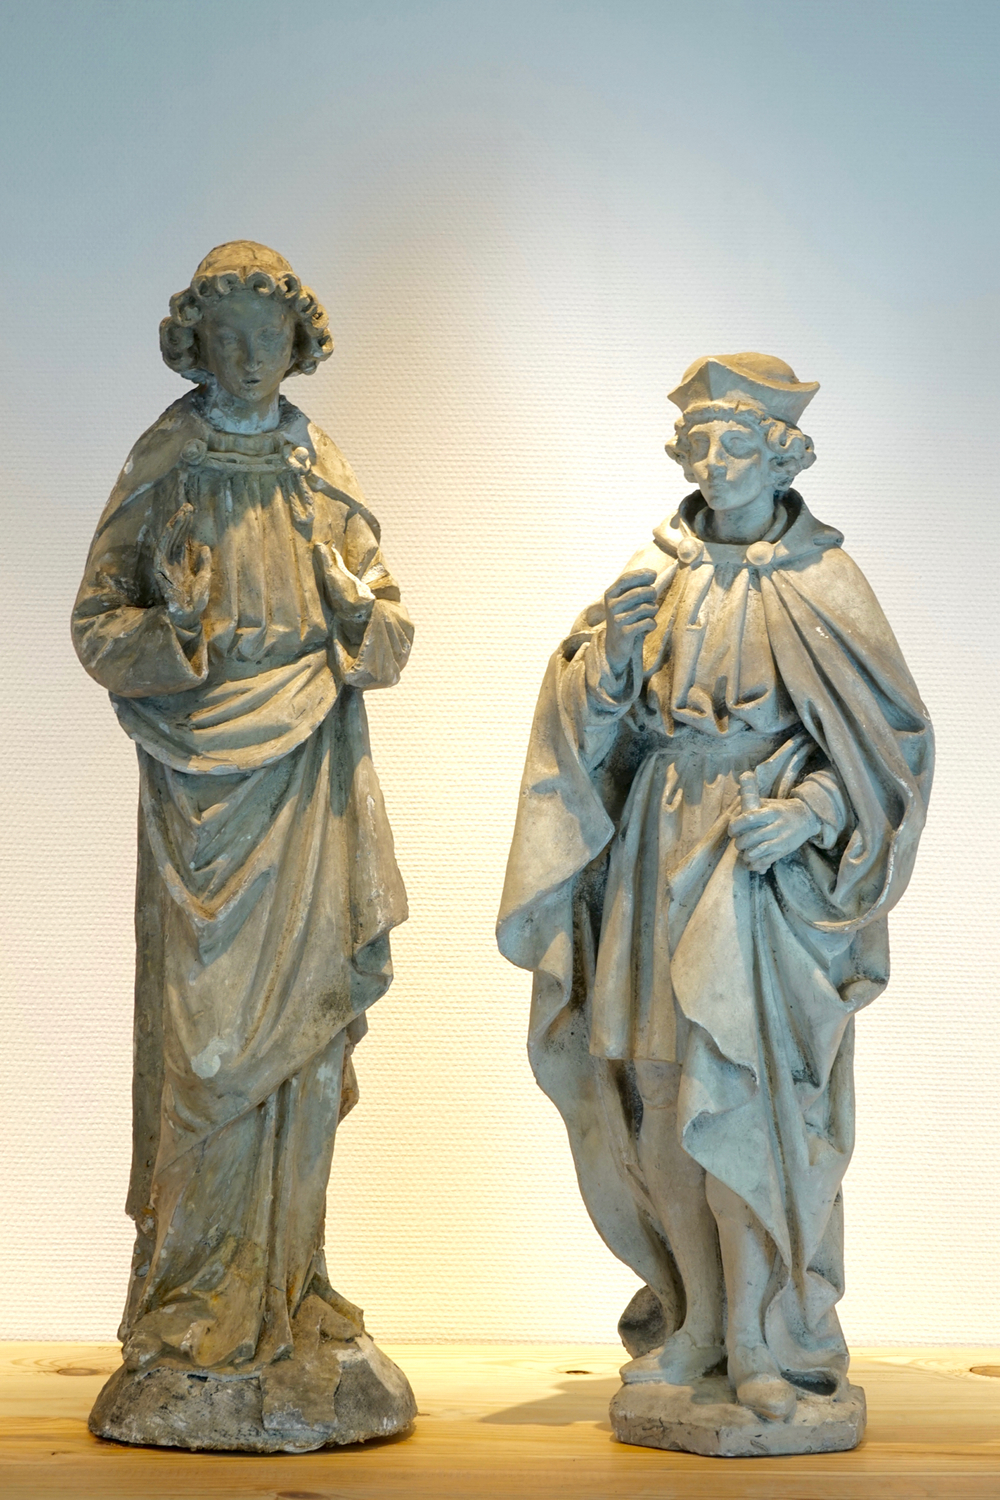 Two 90 cm plaster casts of religious figures, 19/20th C., Bruges